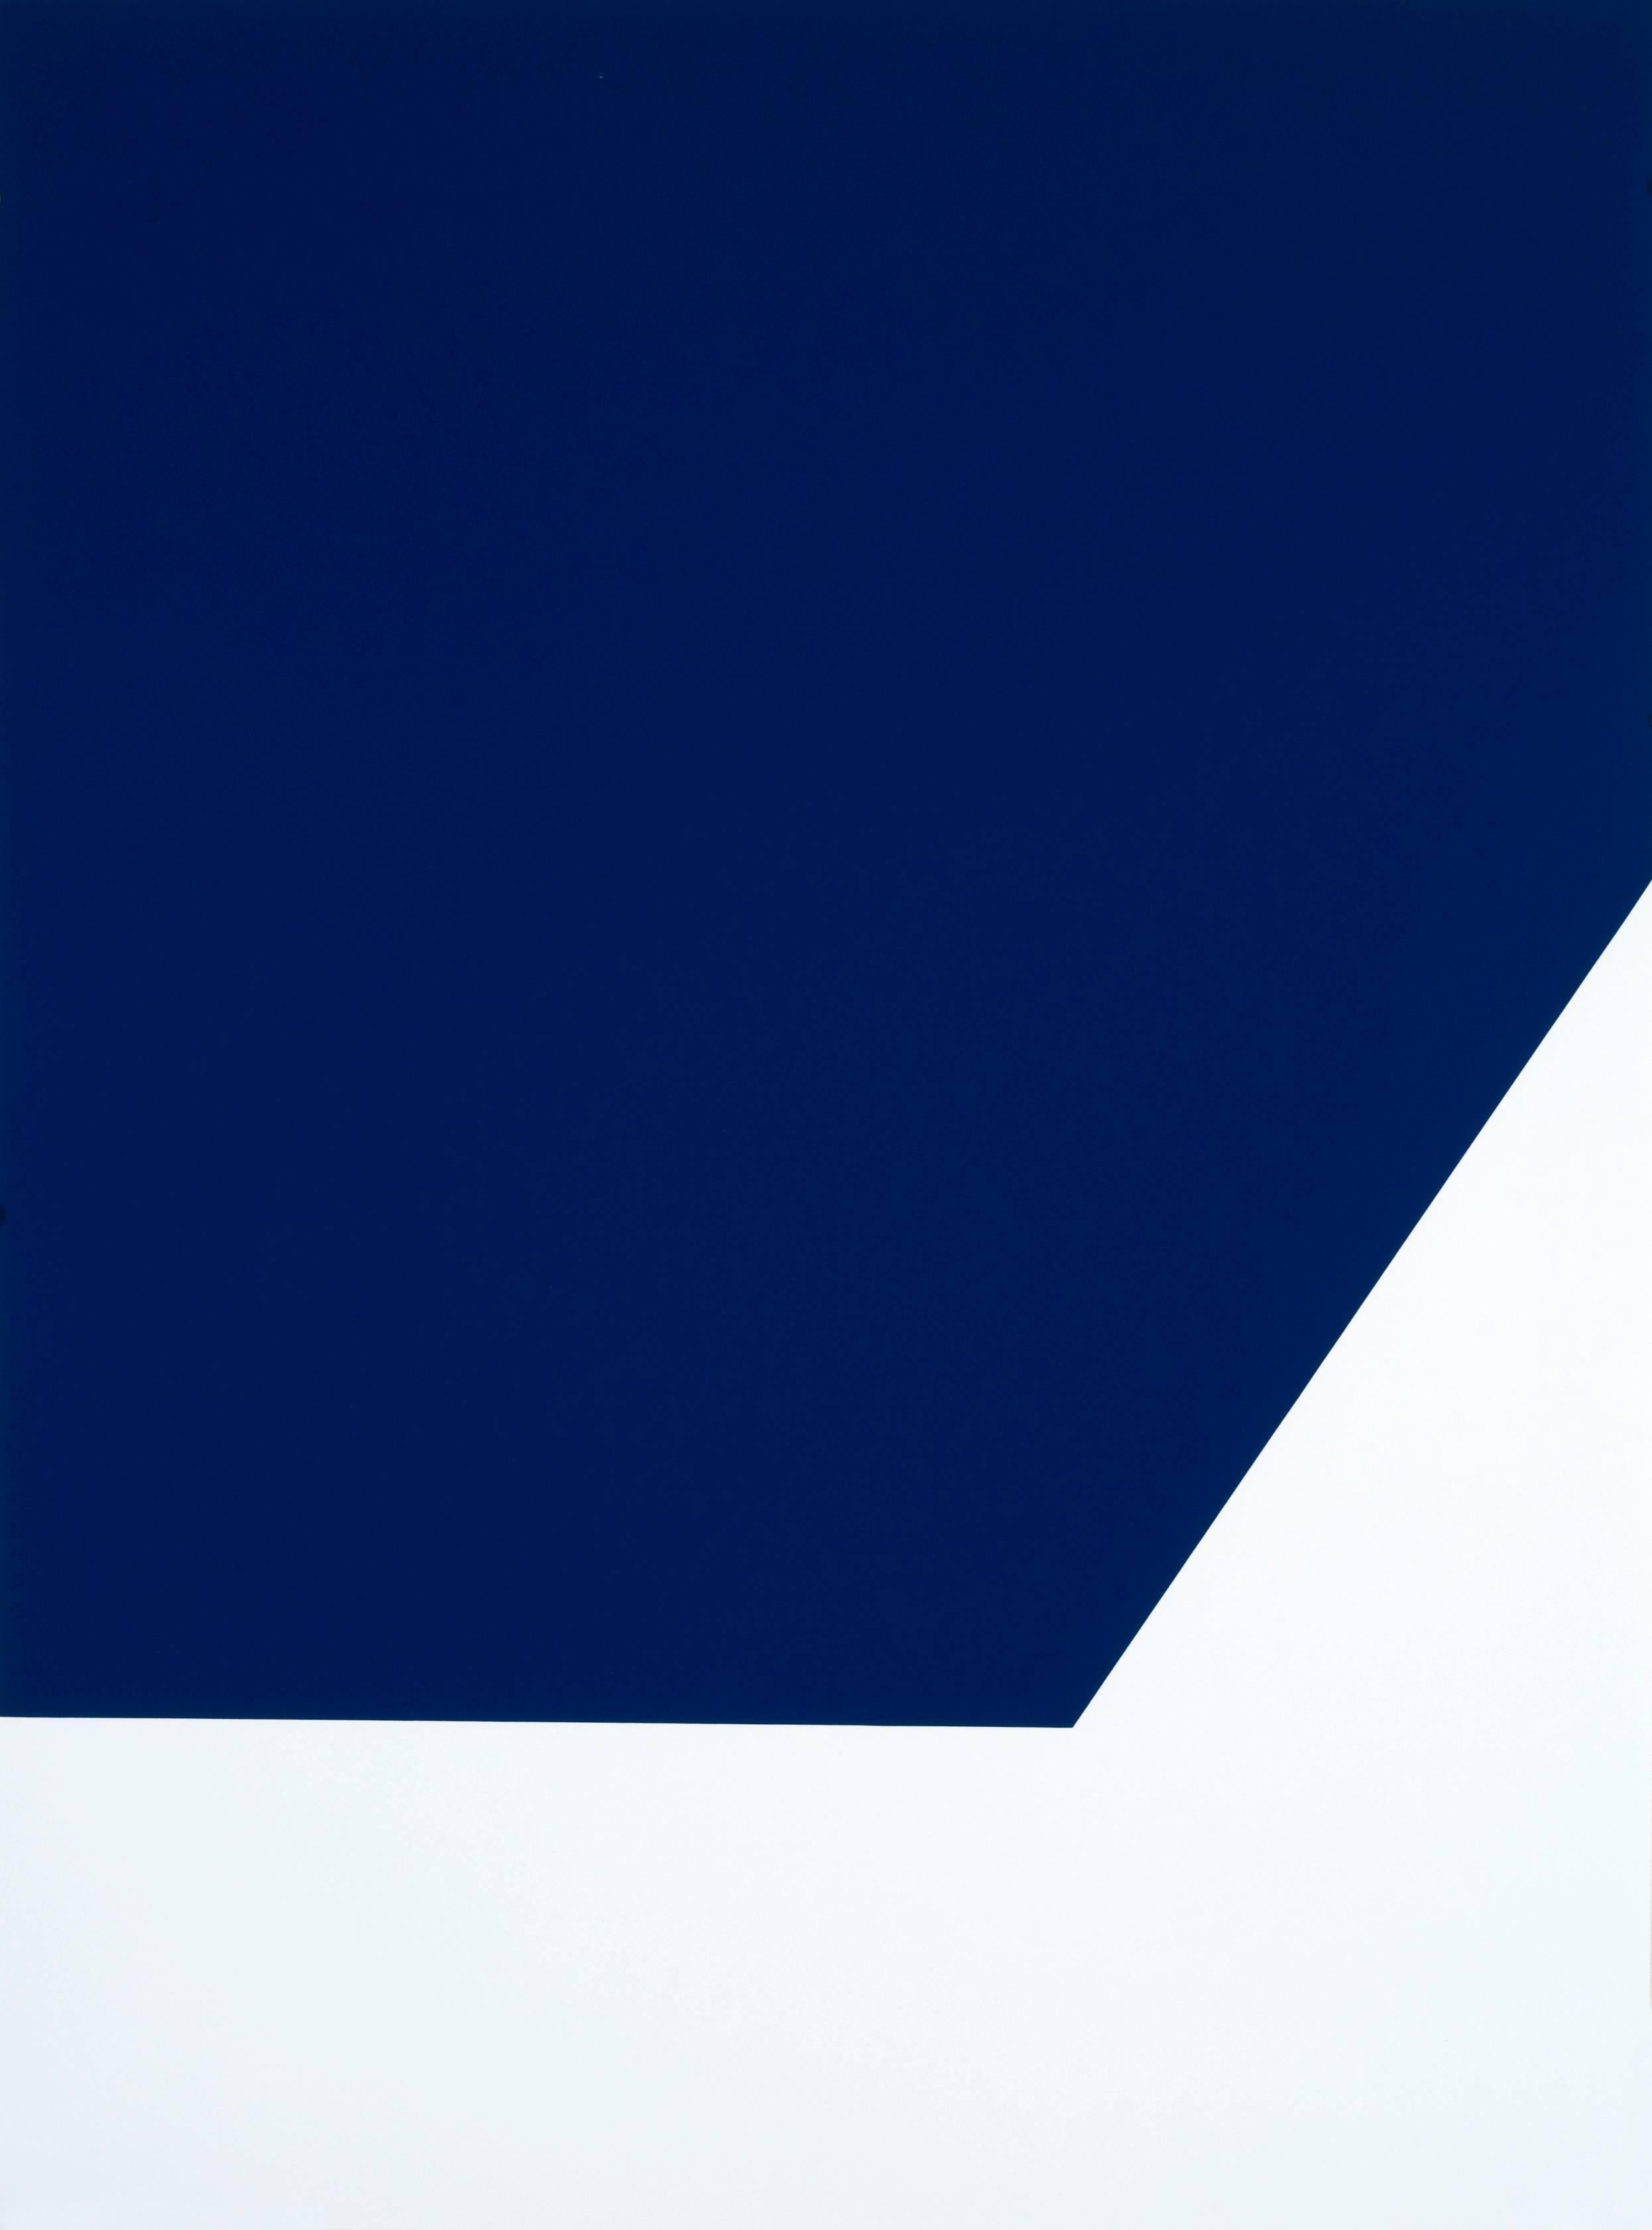 THE MALLARME SUITE - Abstract Print by Ellsworth Kelly